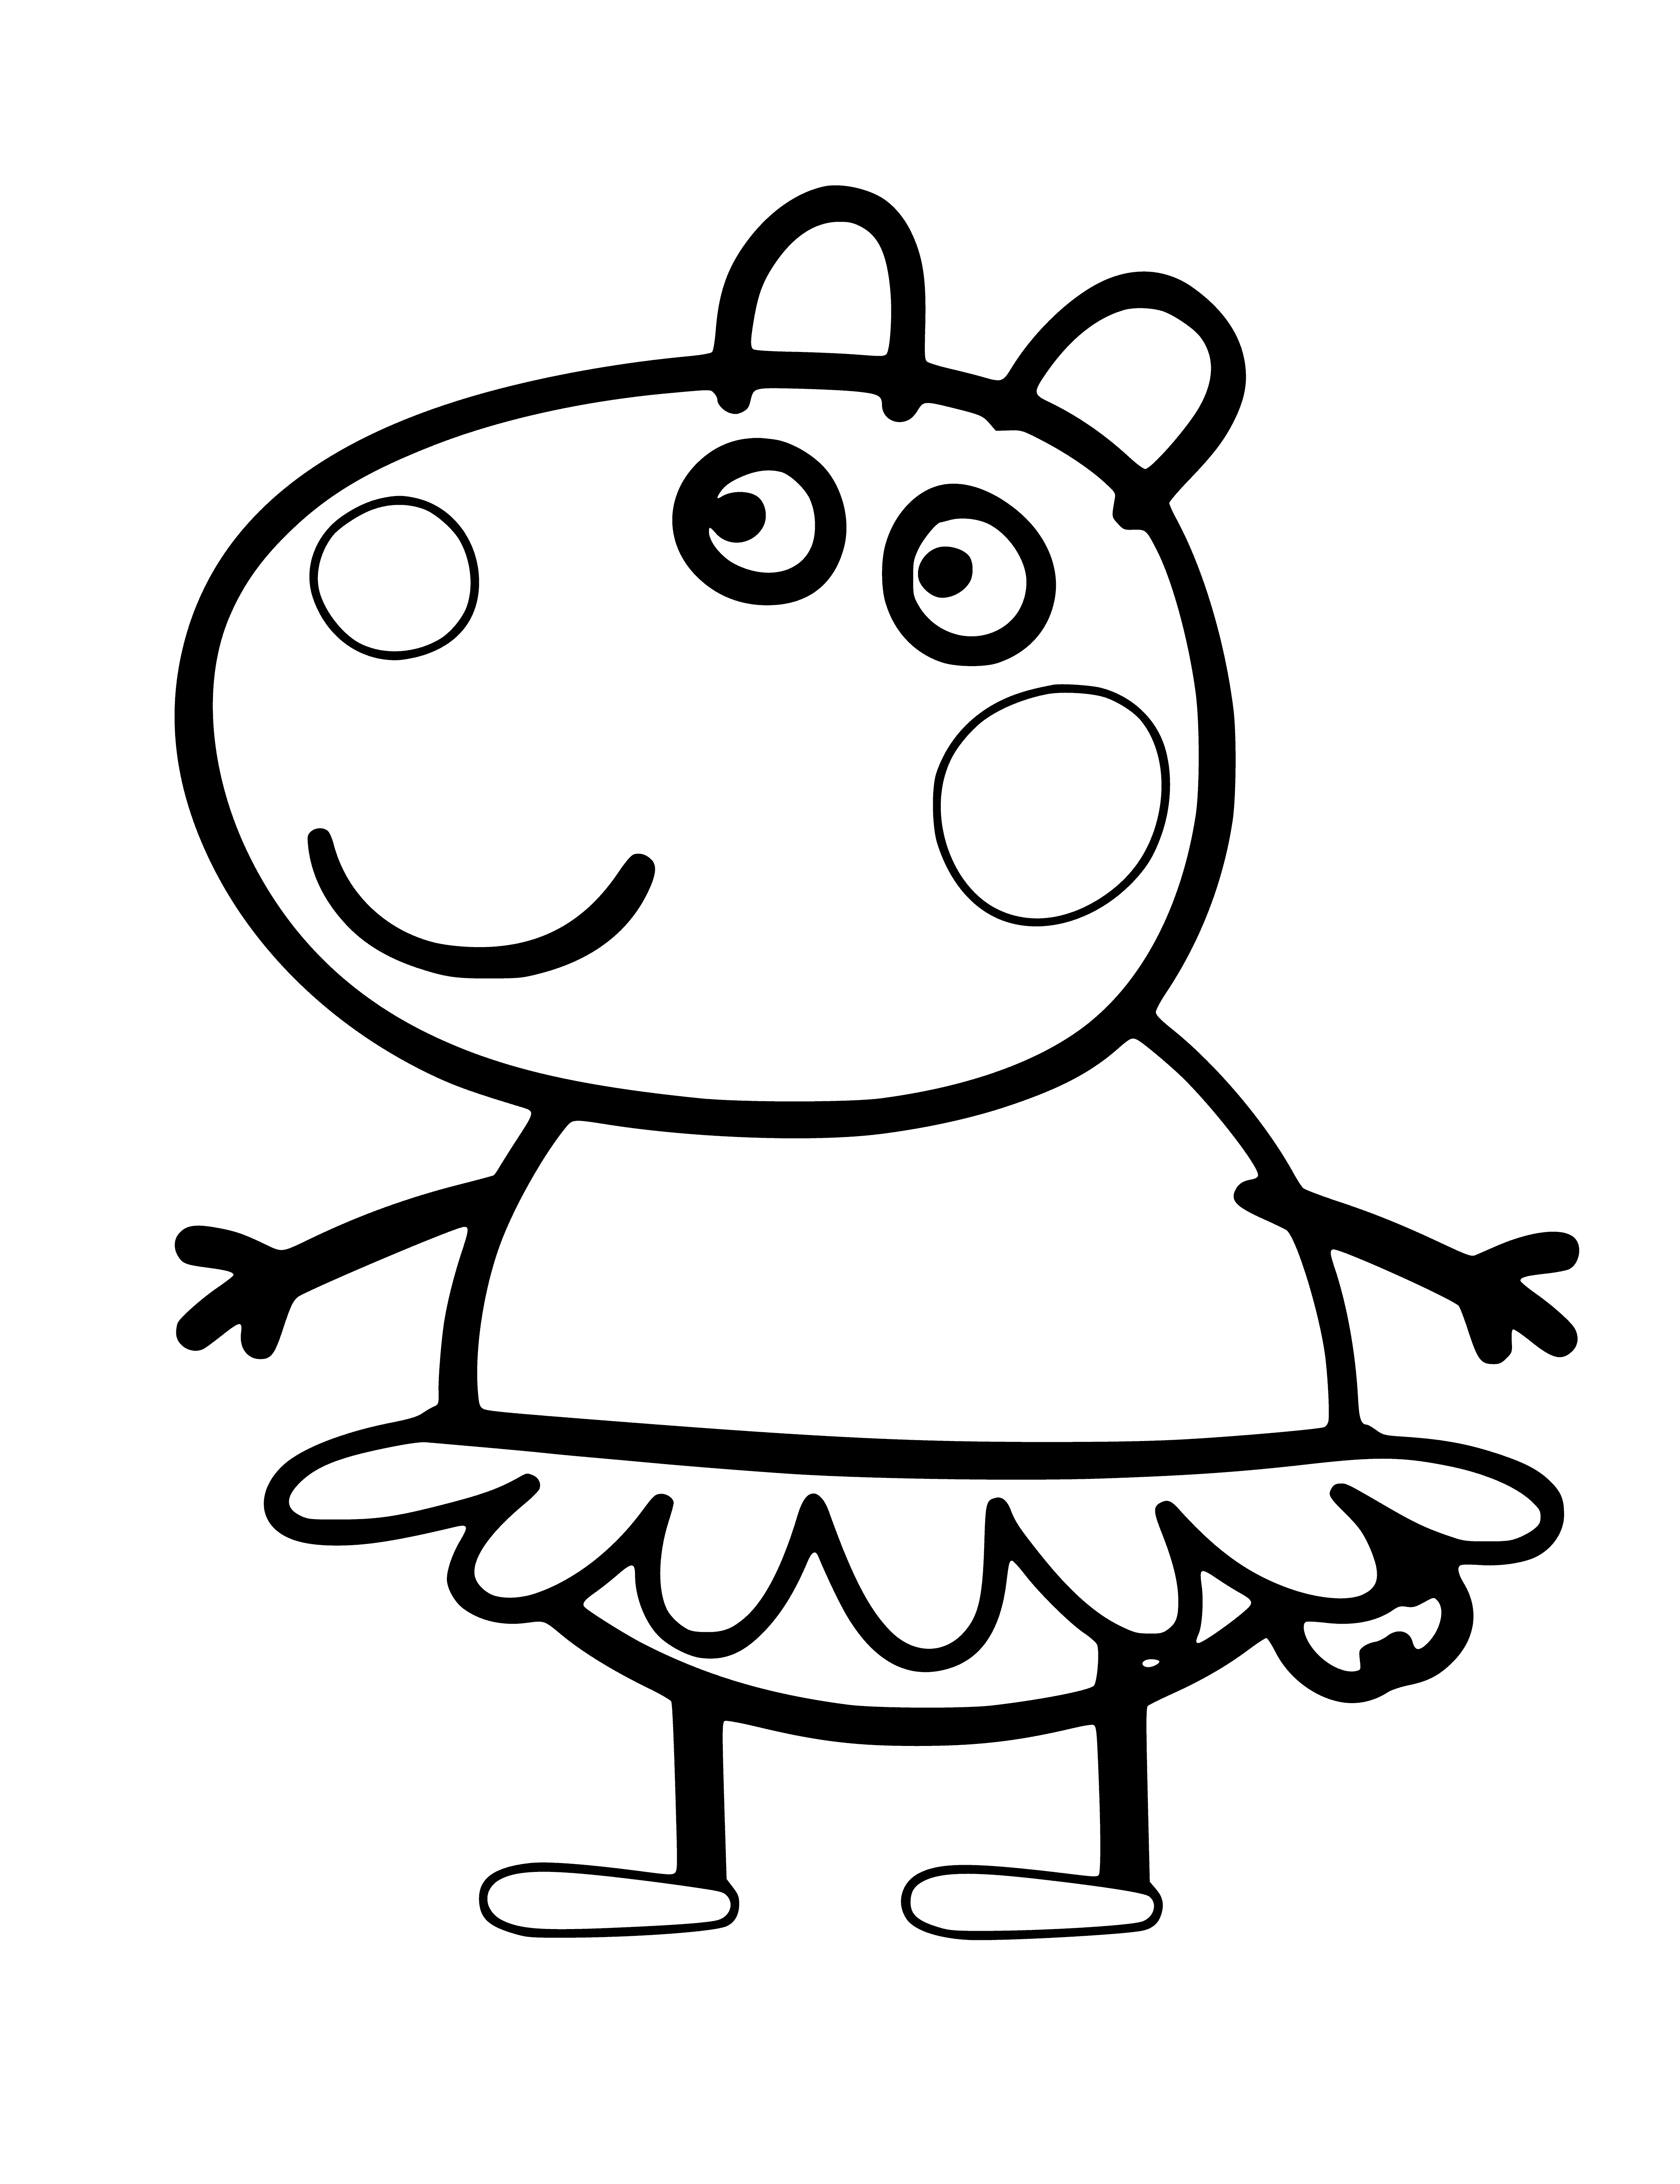 coloring page: Peppa Pig and Susie the Sheep sit happily on a pink mat; Susie has a blue bow on her head.